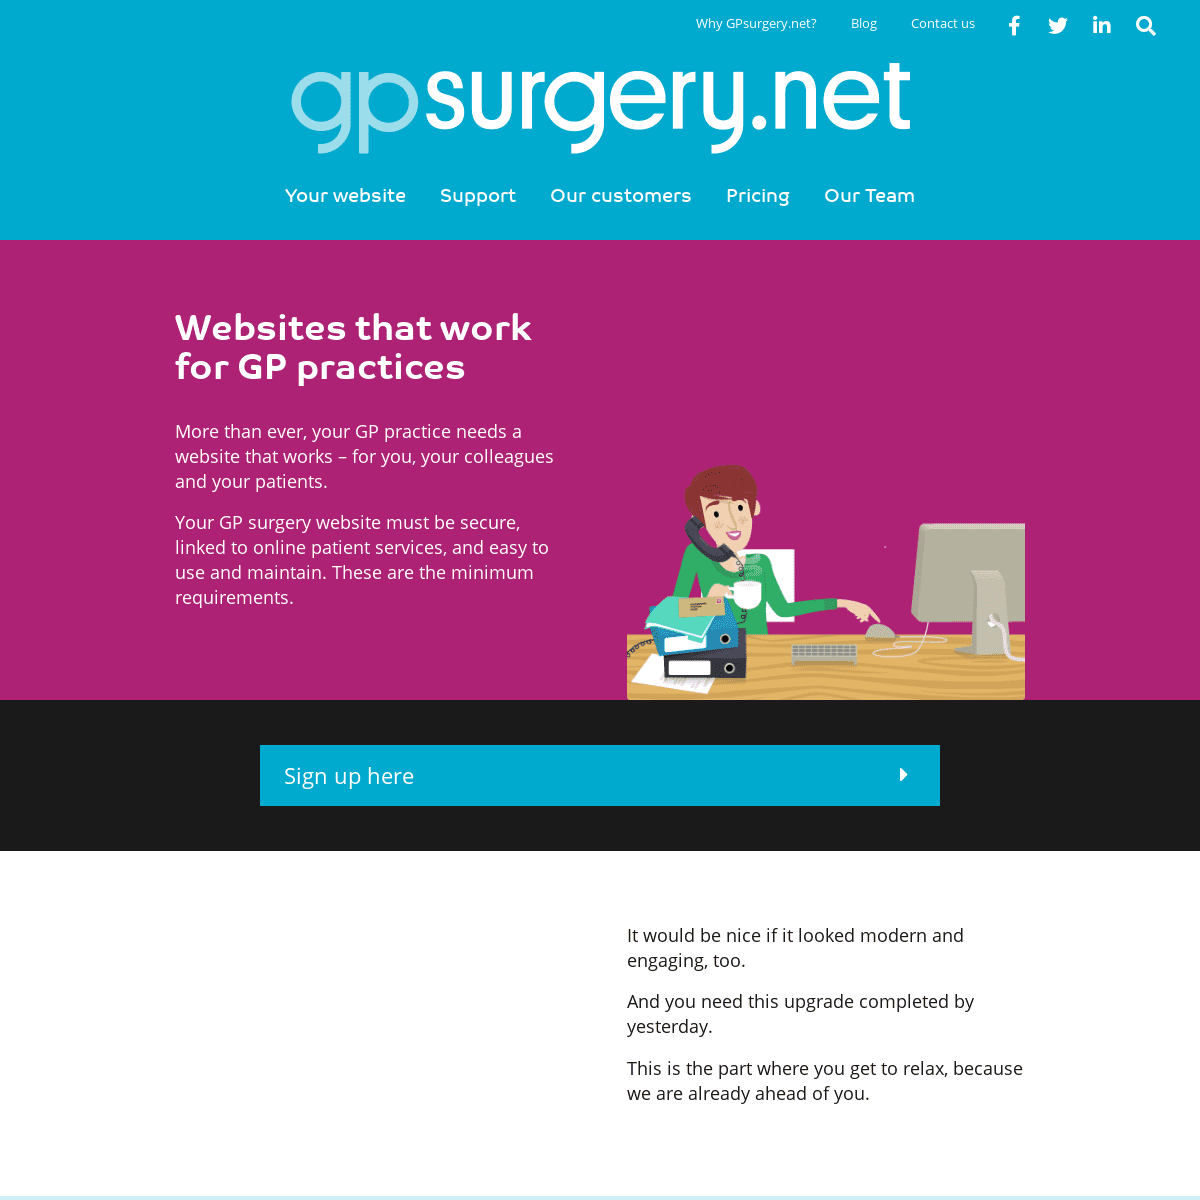 A complete backup of https://gpsurgery.net